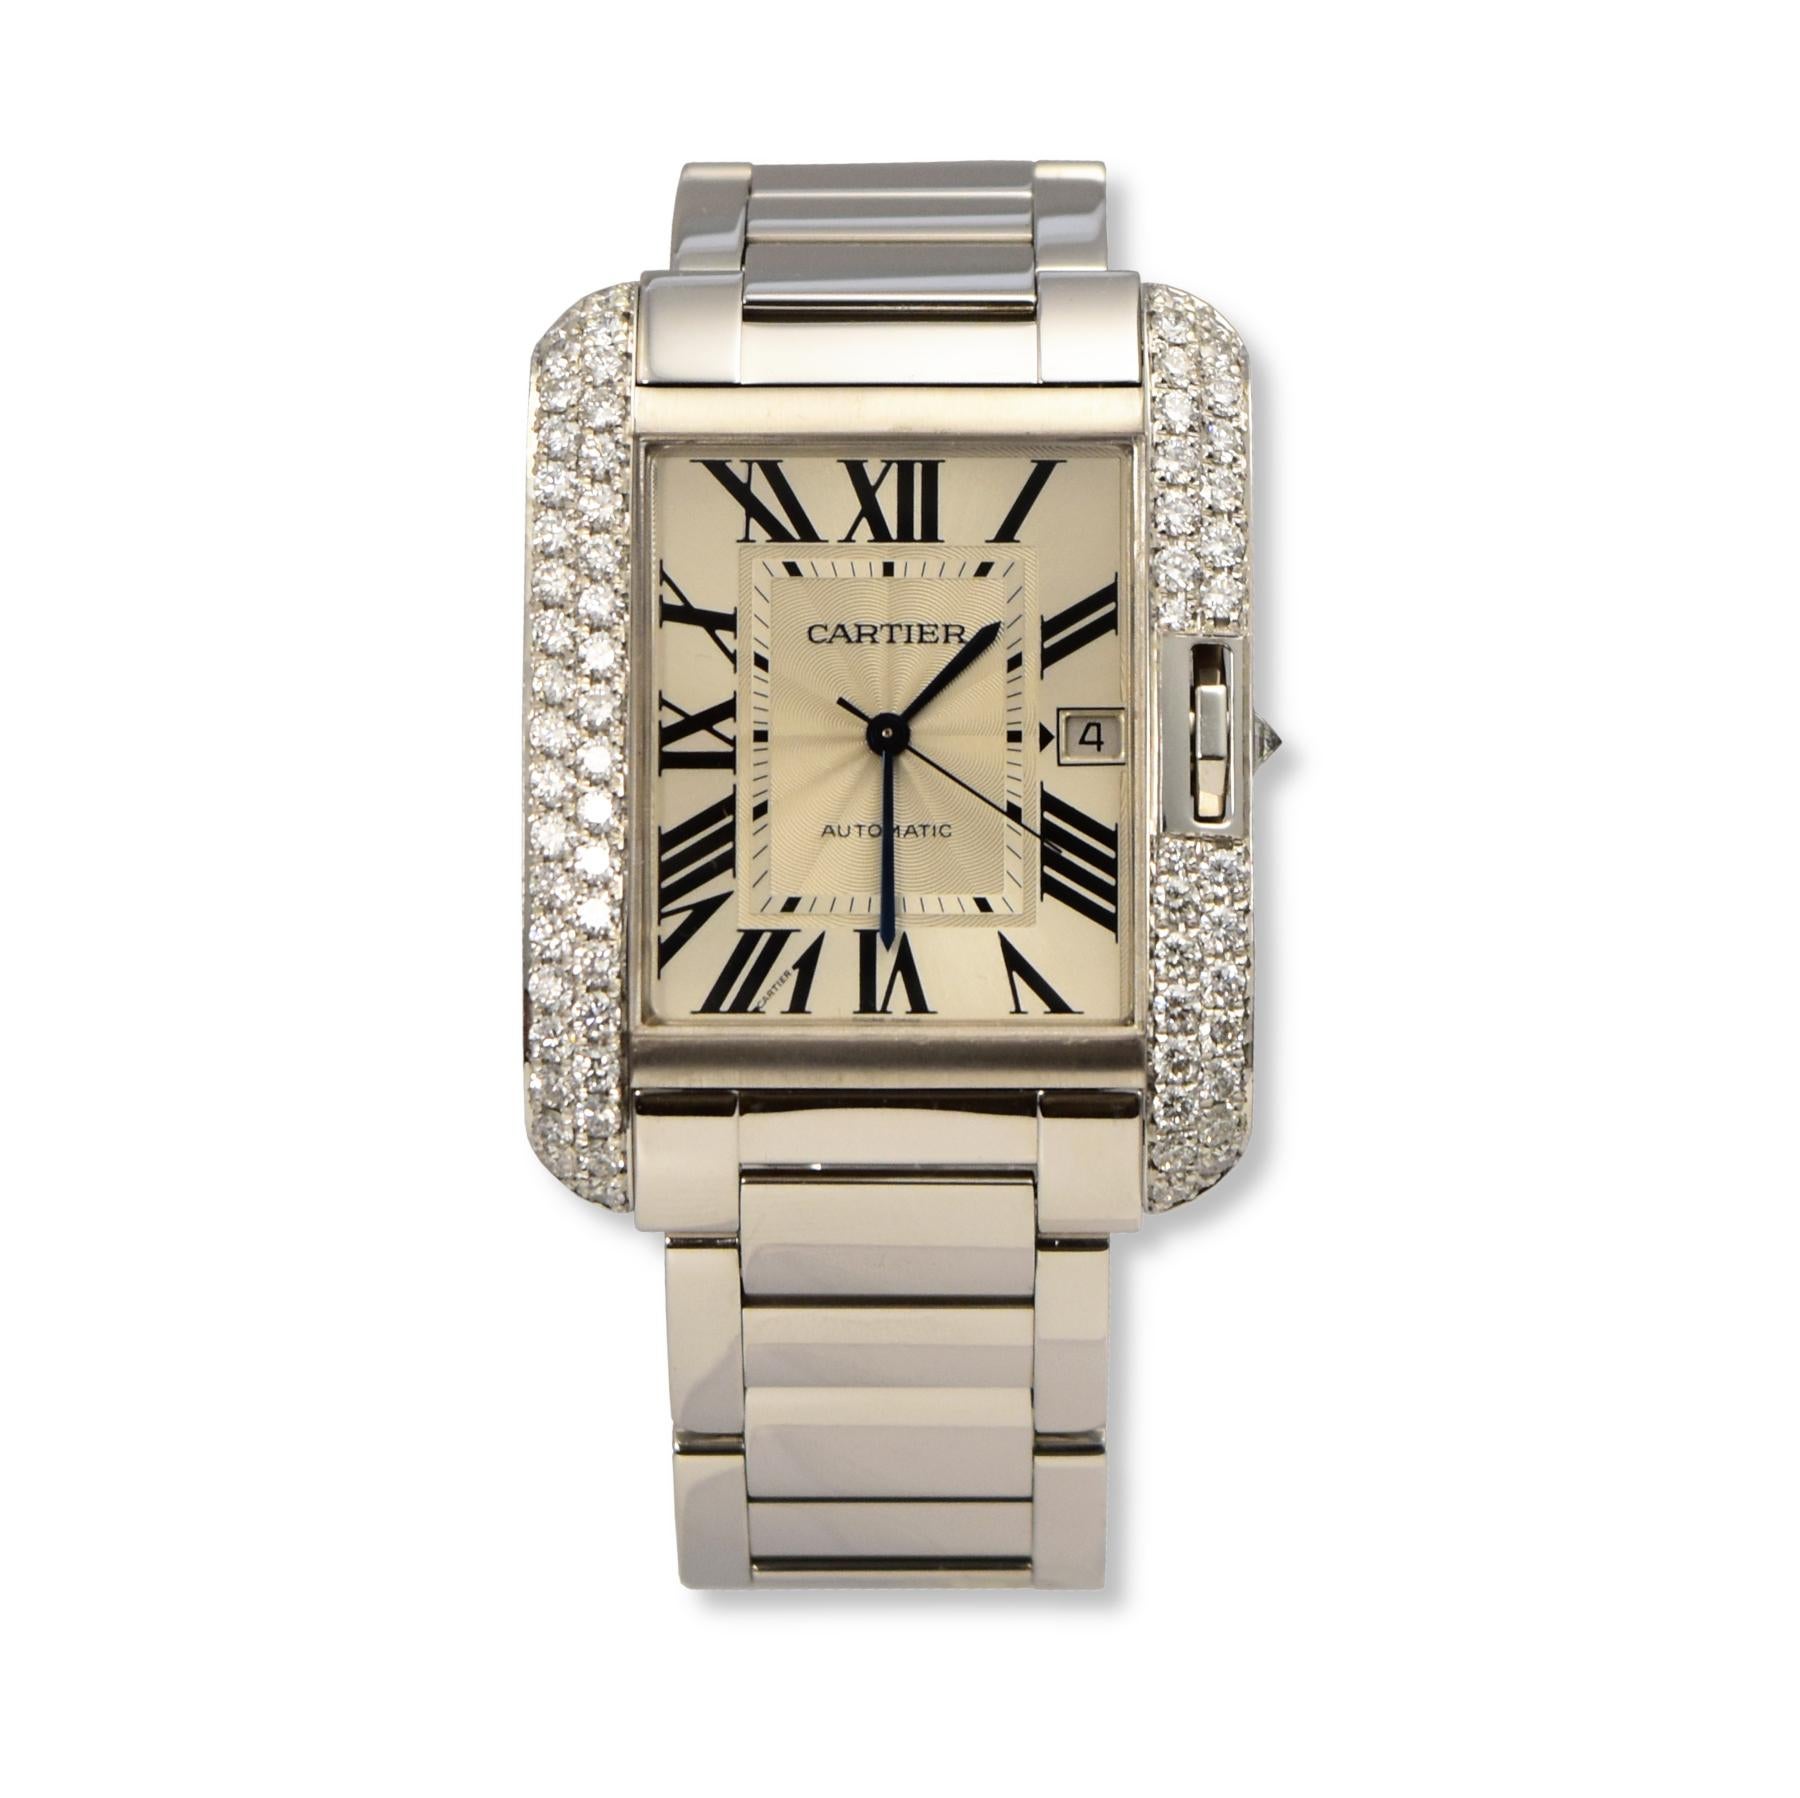 Brand: Cartier
Model: Tank Anglaise 
Movement: Automatic 
Case Size: 37 x 47 mm
Stone: Round Cut Diamonds
Dial: Roman Numeral
Case Material: White Gold
Bracelet Material: White Gold
Crystal: Scratch-Resistant Sapphire Glass
Includes: 24 Month